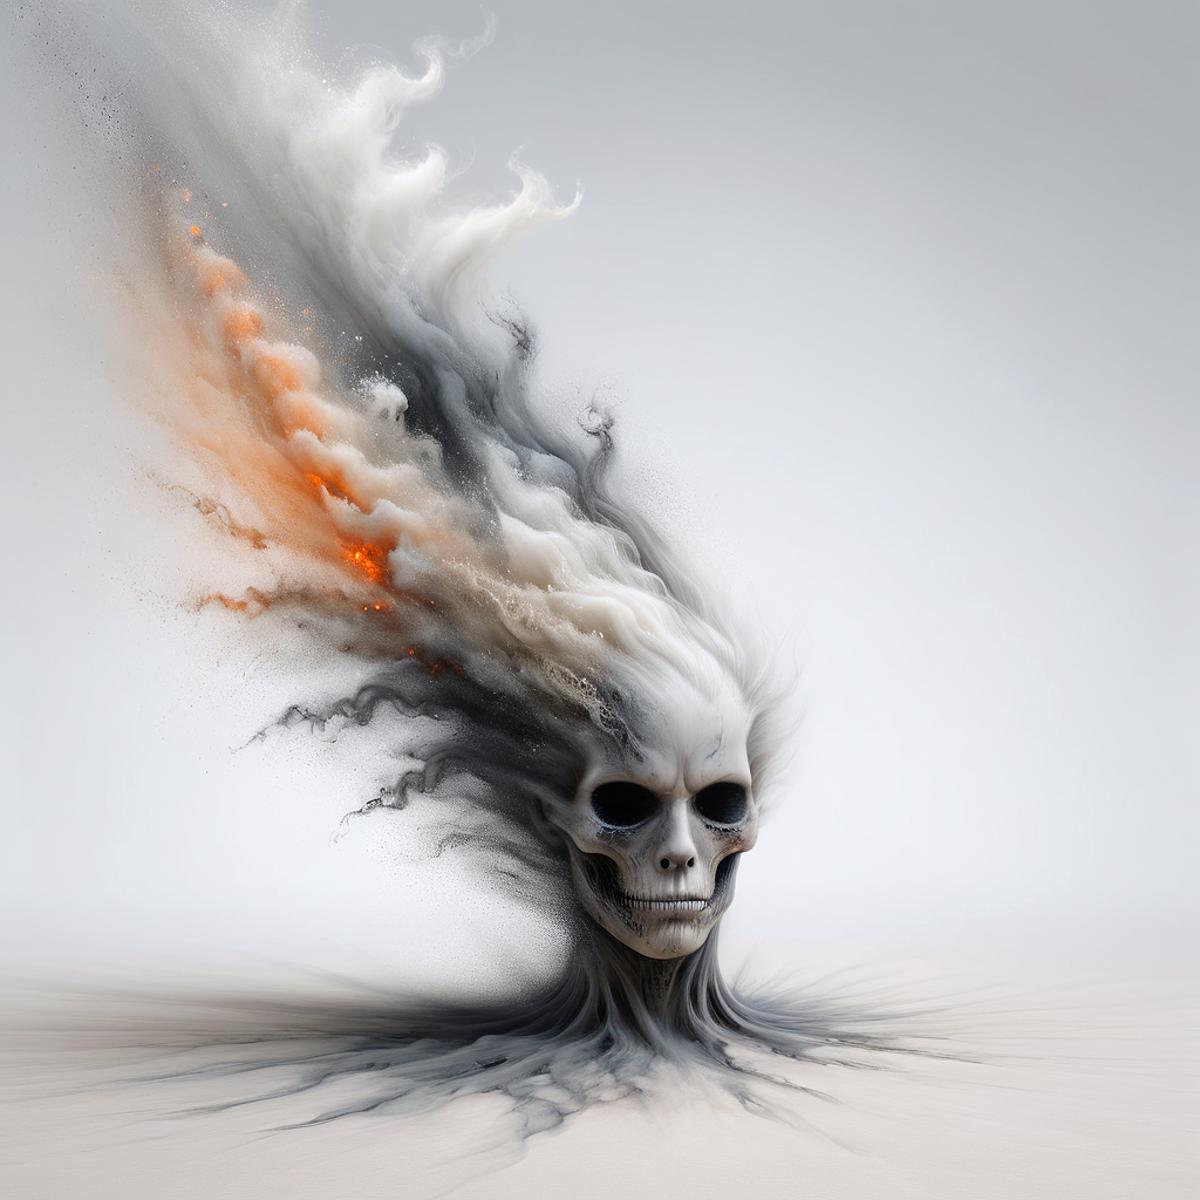 A skull with an explosion of fire surrounding it.